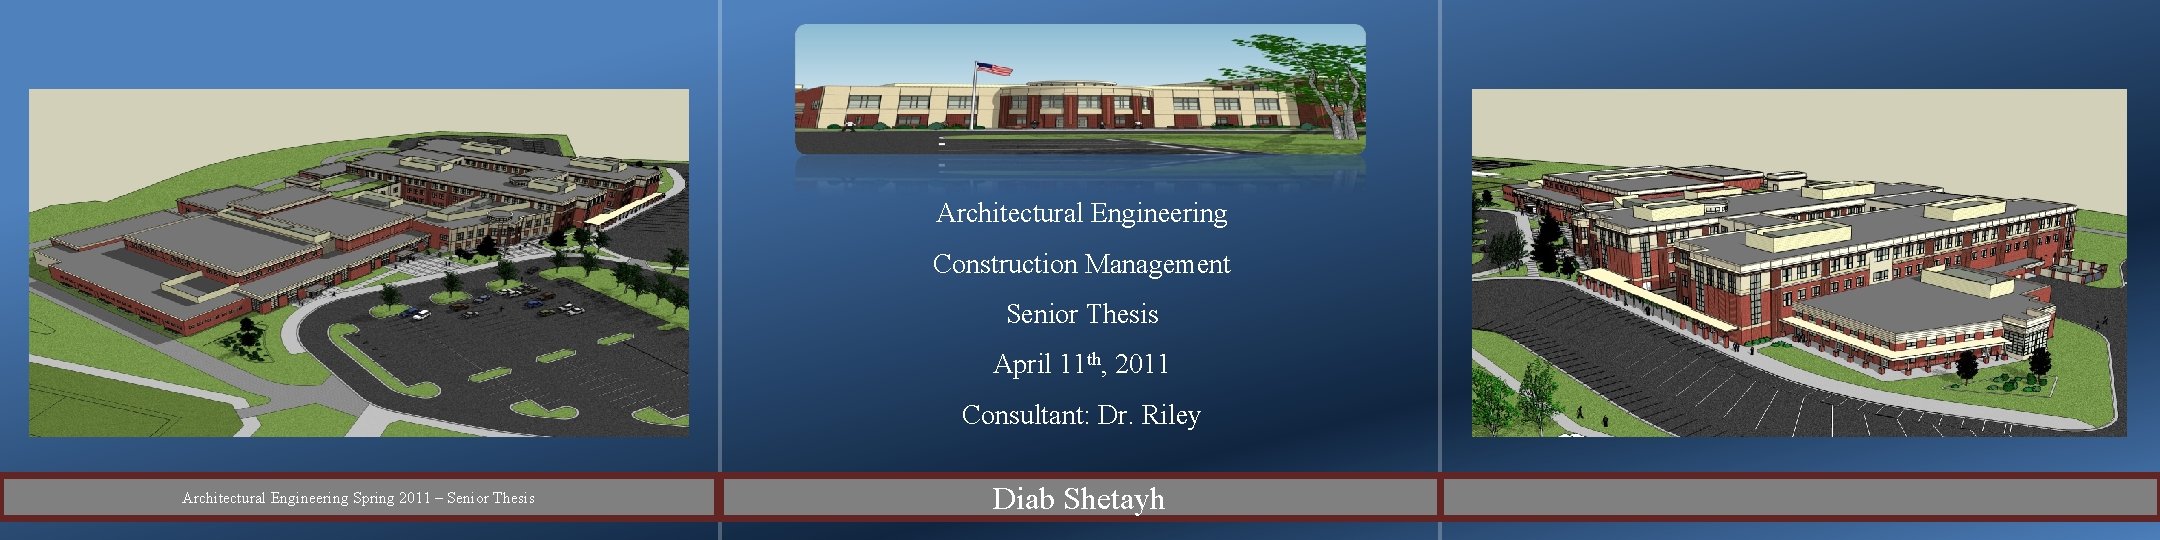 Architectural Engineering Construction Management Senior Thesis April 11 th, 2011 Consultant: Dr. Riley Architectural